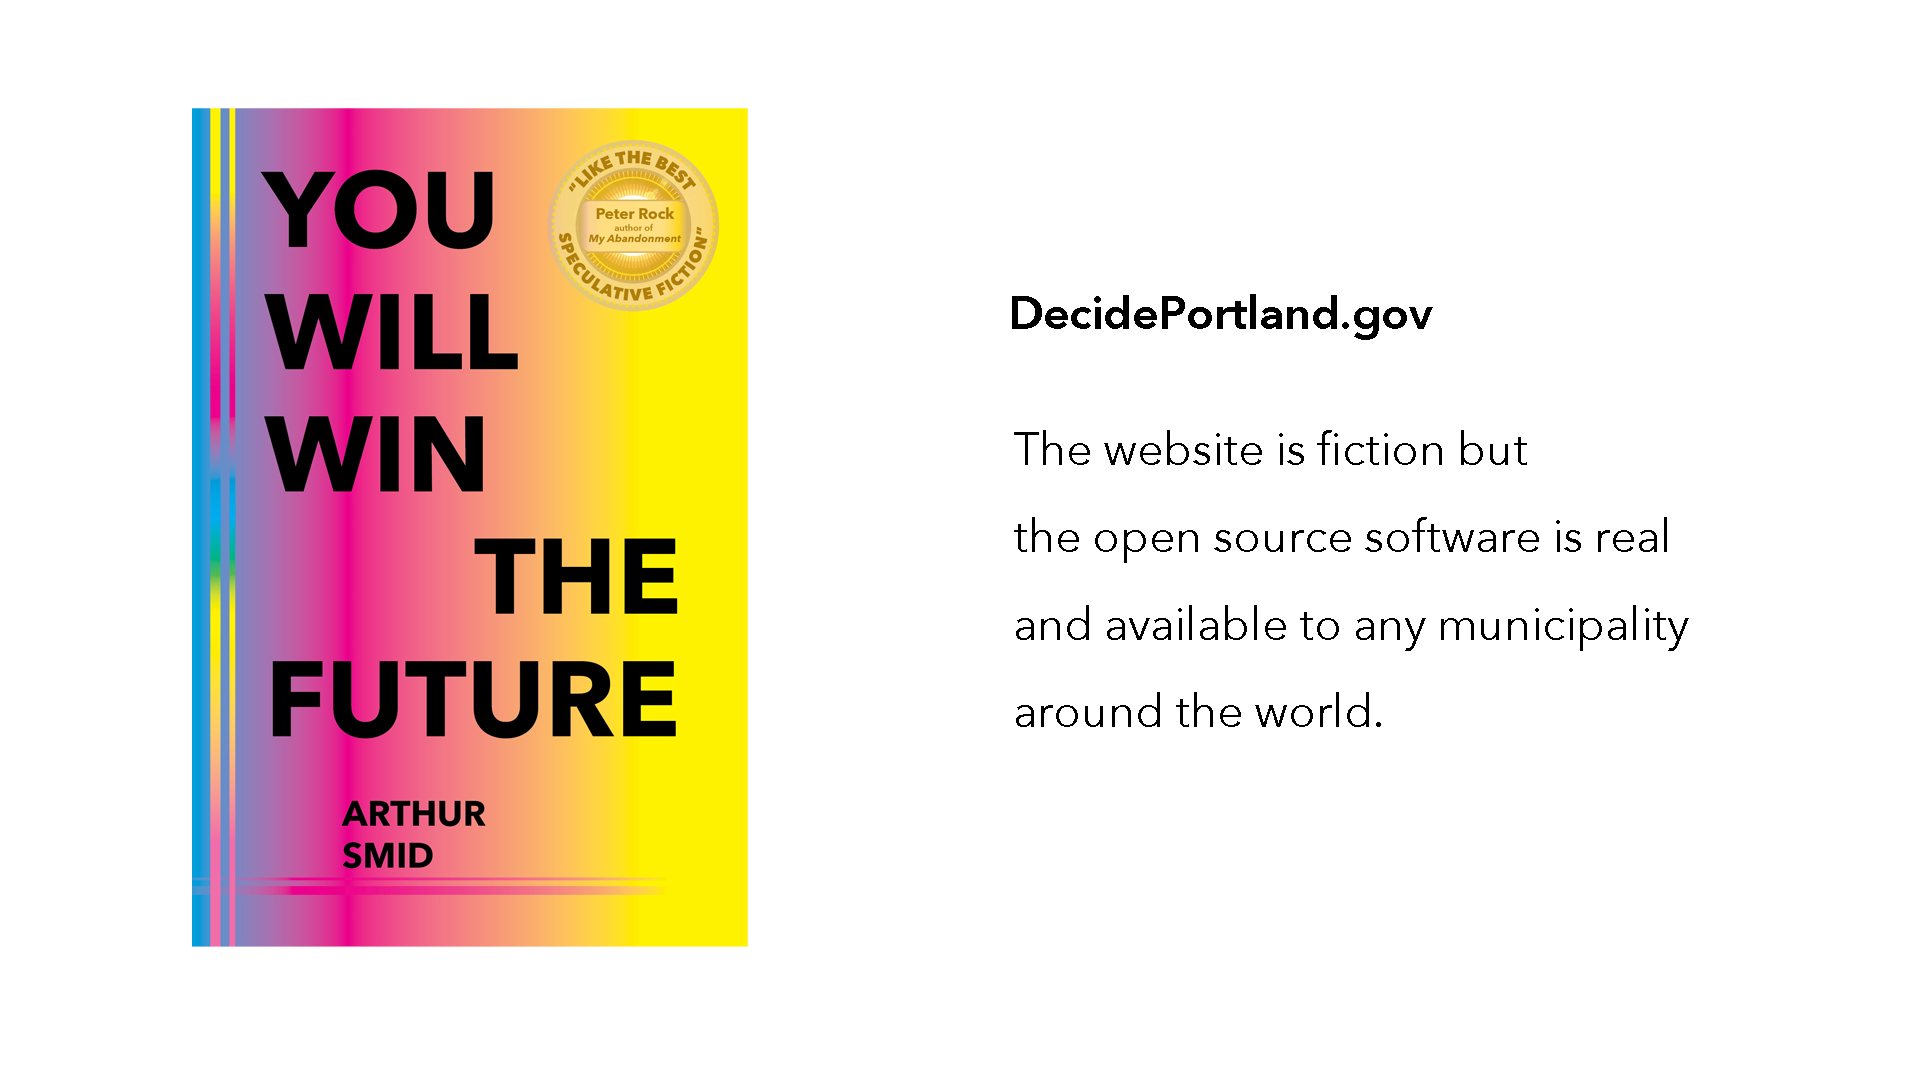 You Will Win The Future, a book by Arthur Smid